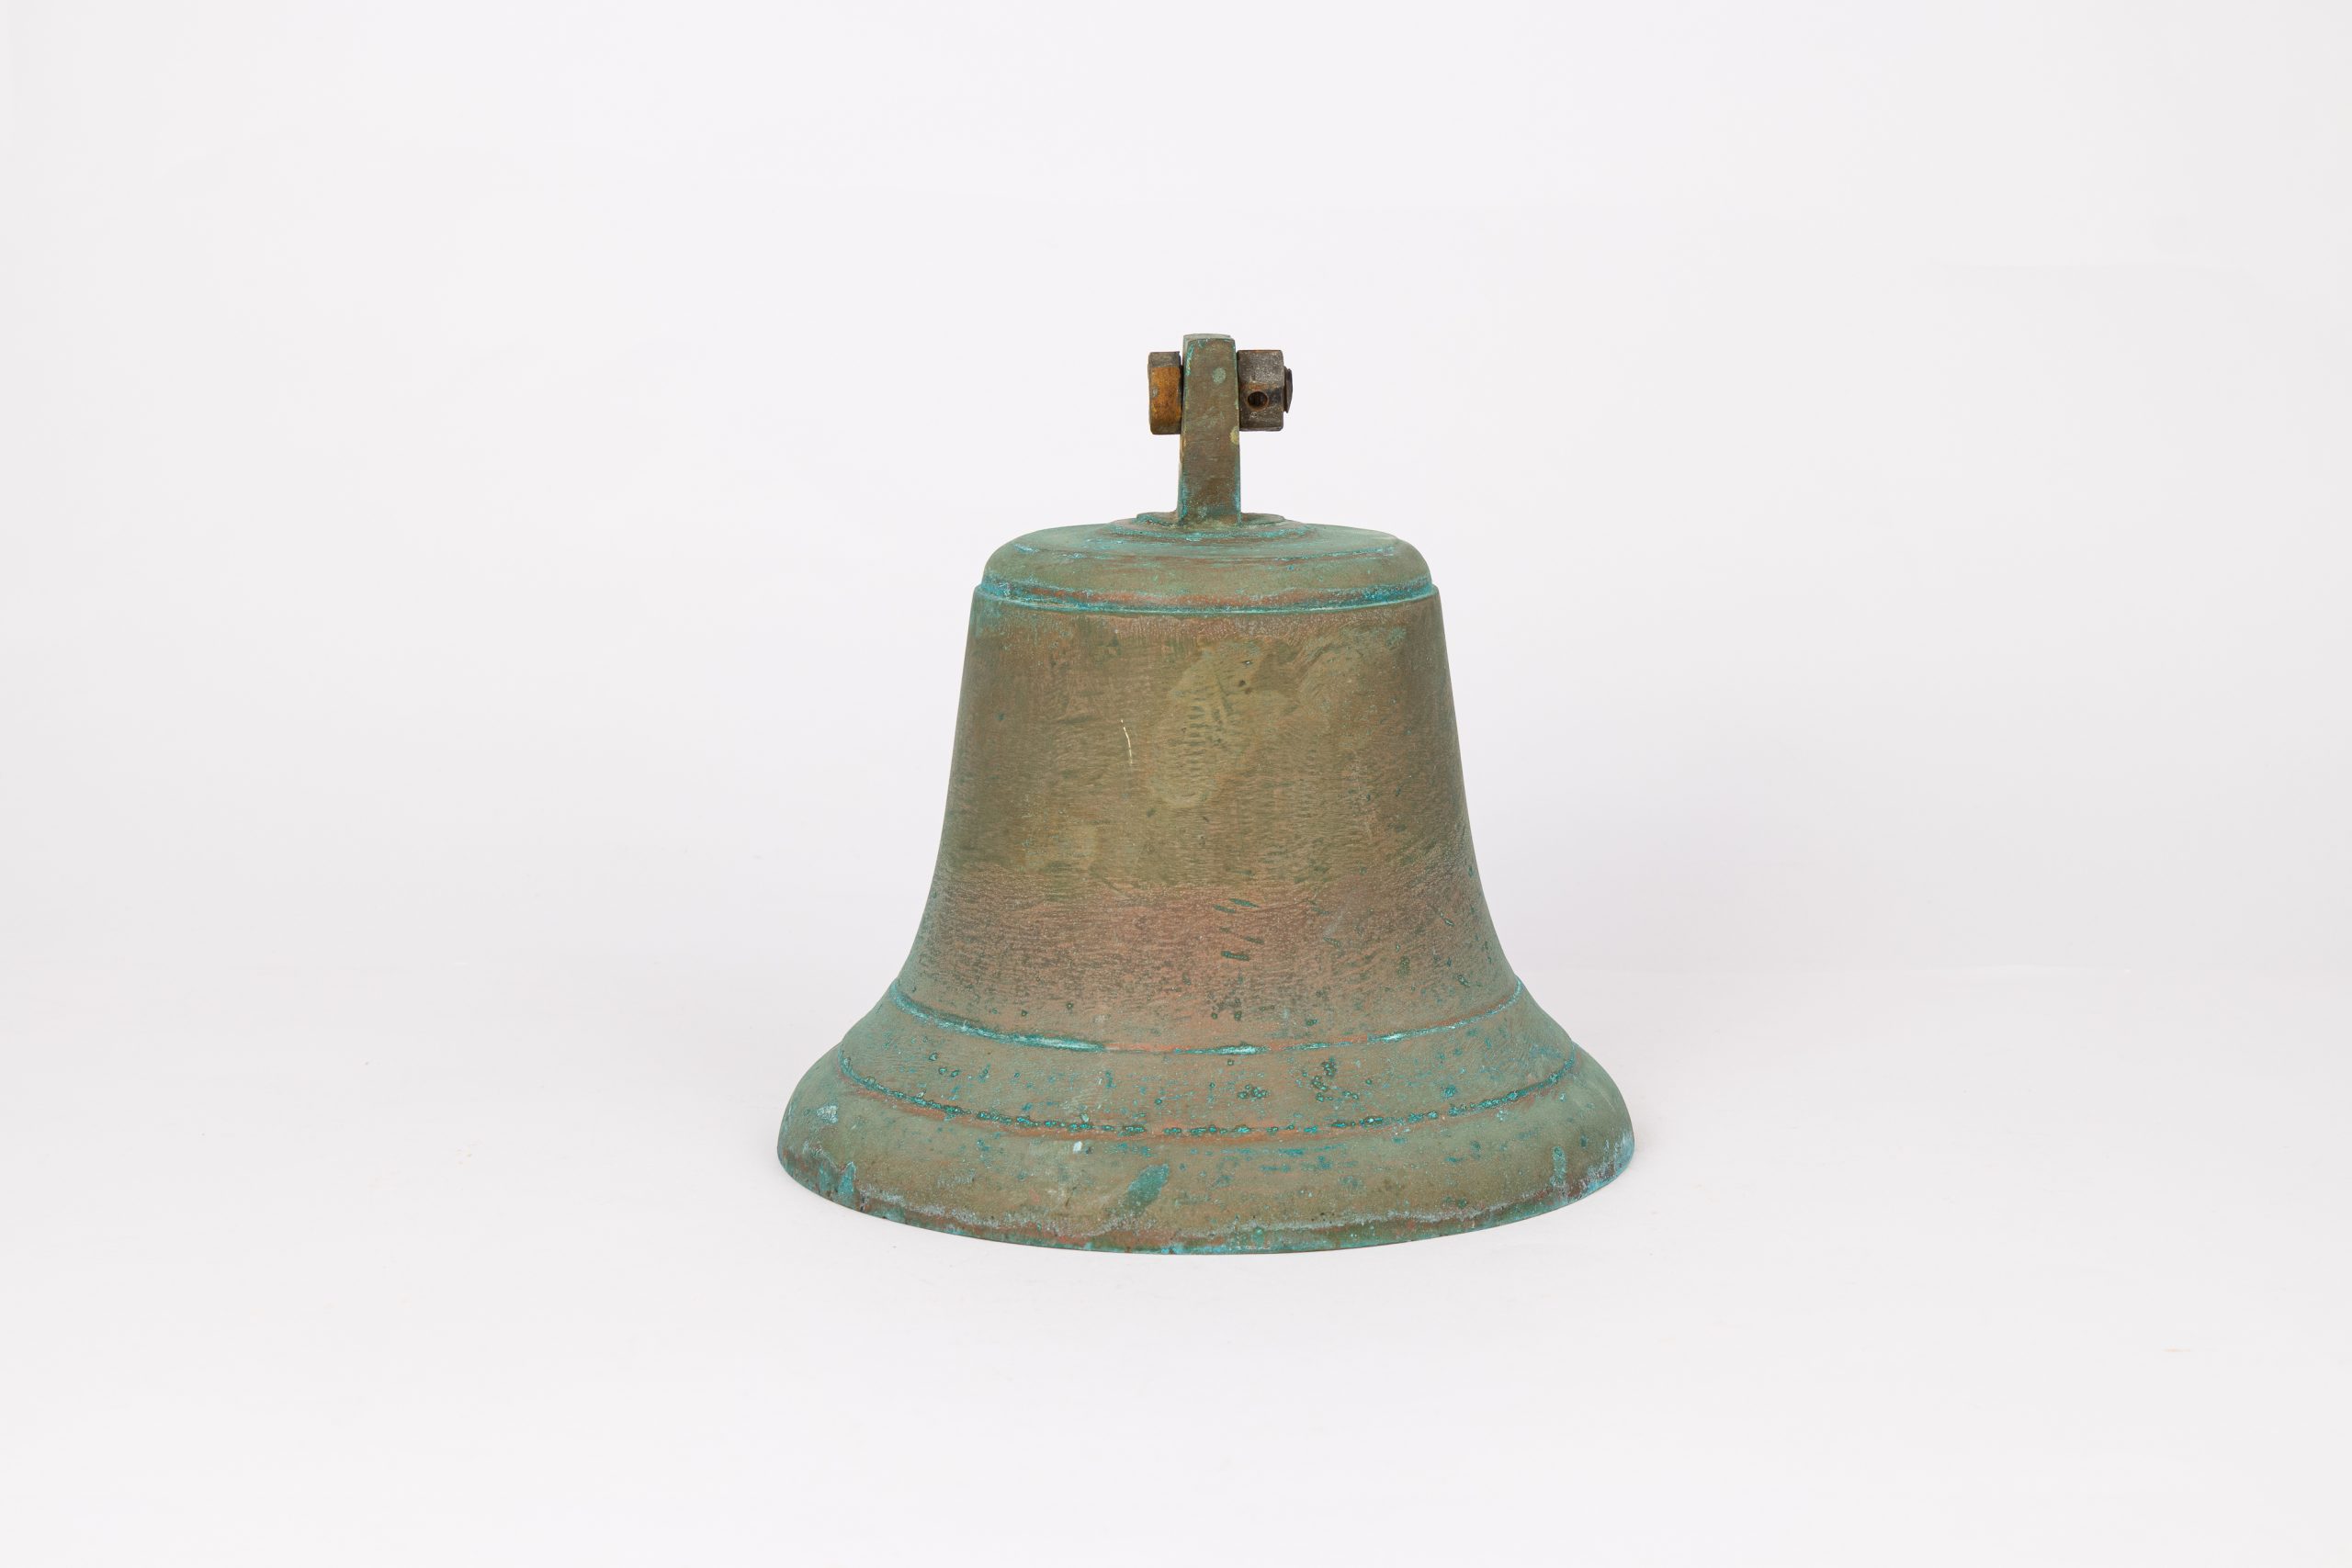 Brassy metal bell with green oxidisation